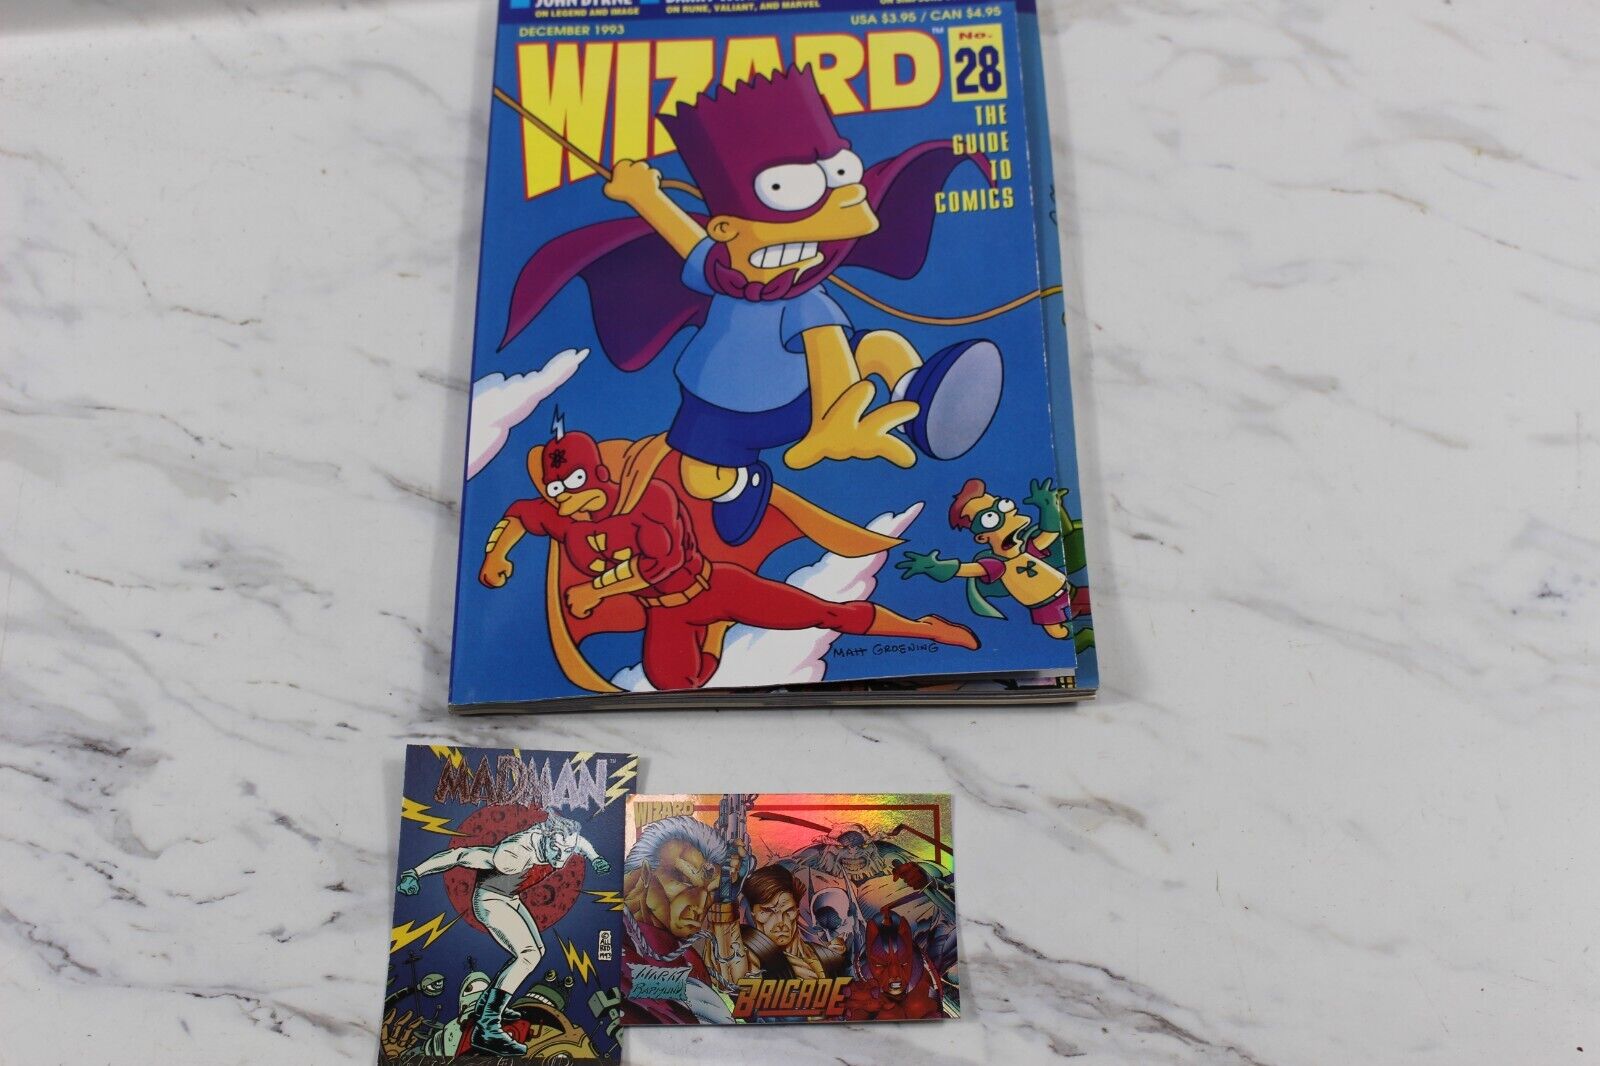 WIZARD The Guide to Comics Magazine #28 December 1993 Bart Simpsons with 2 cards